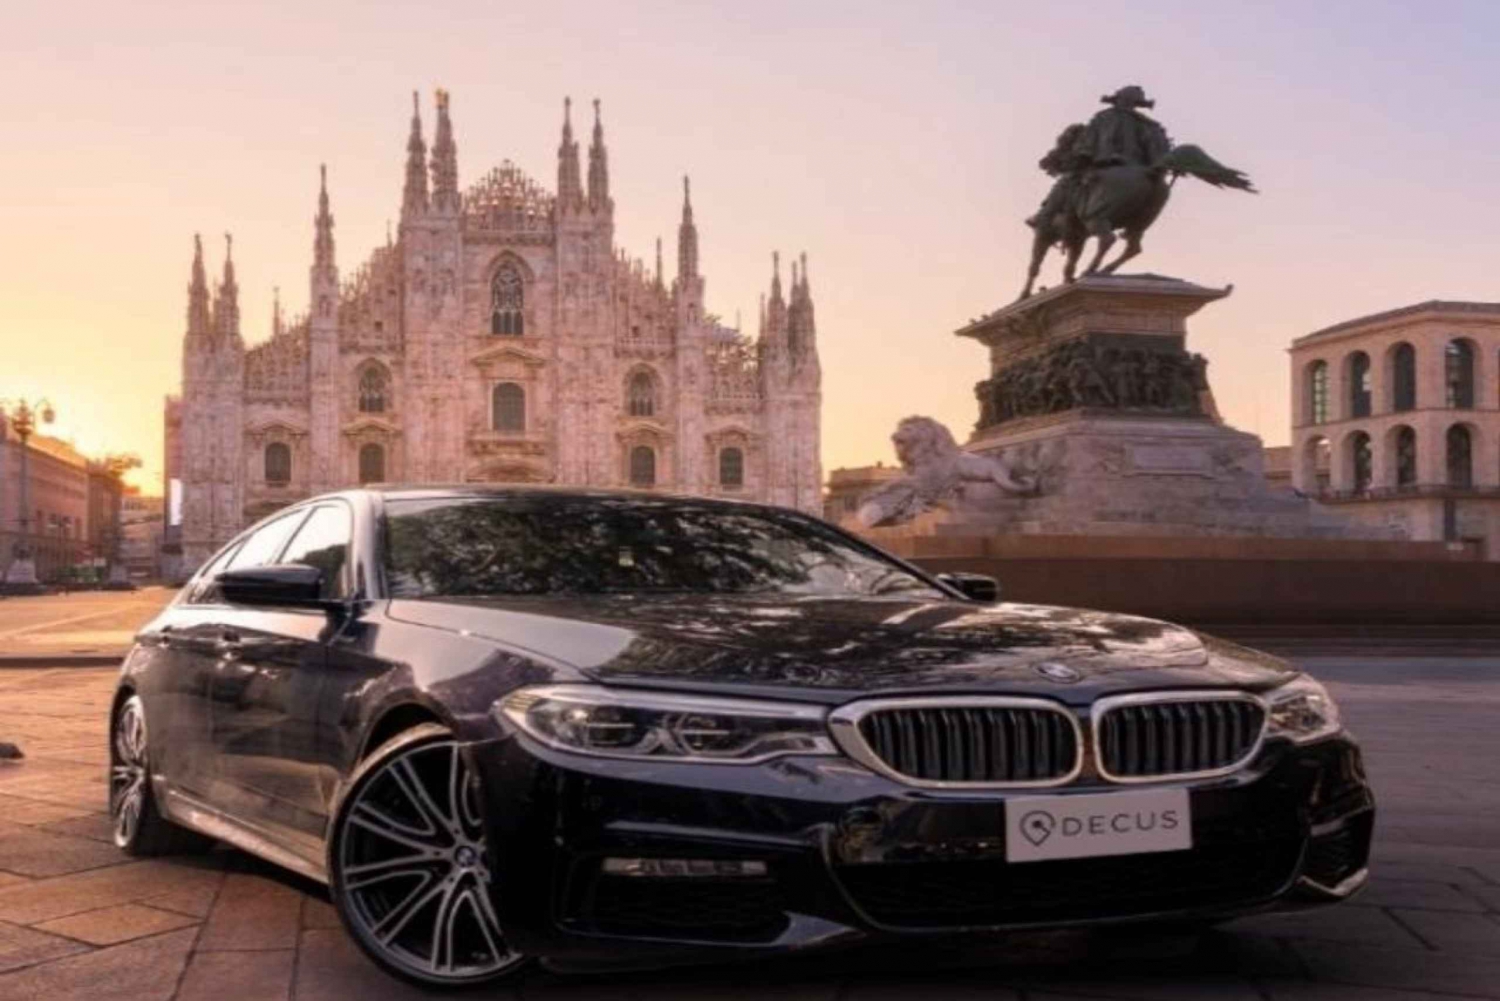 From Malpensa airport : Private 1-Way Transfer to Milan